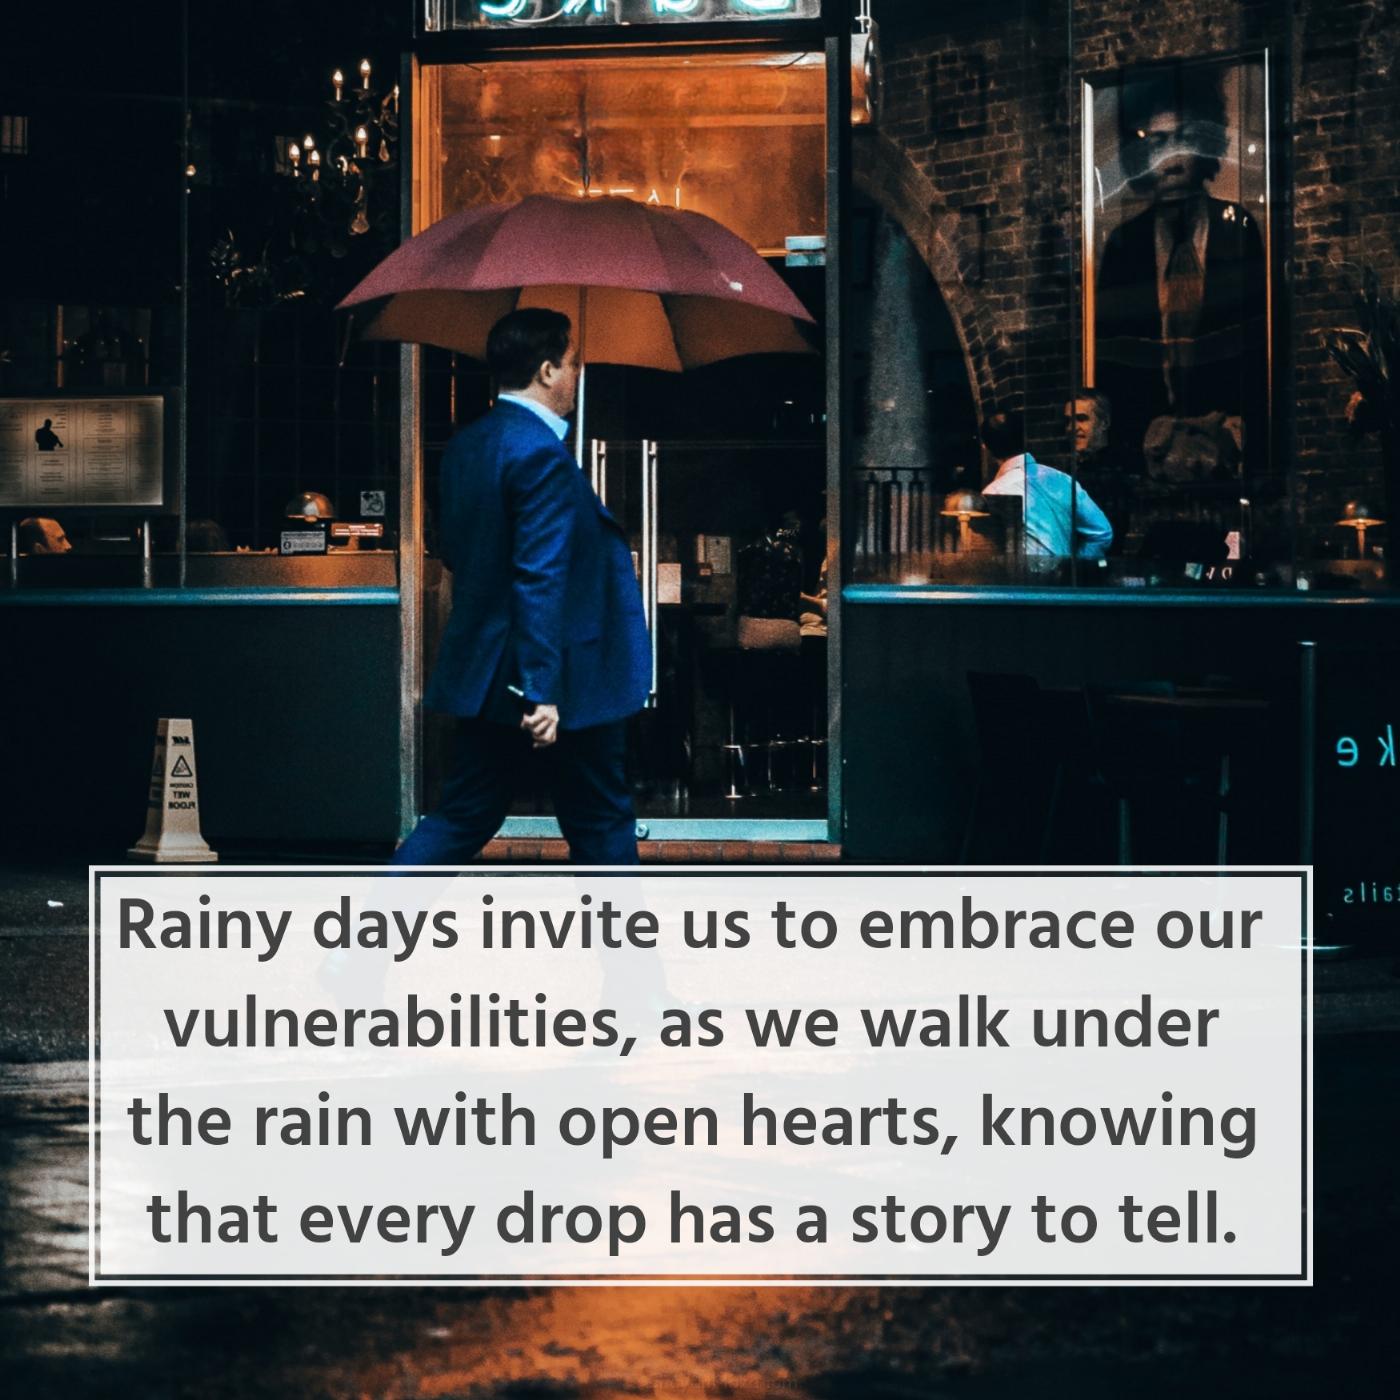 Rainy days invite us to embrace our vulnerabilities